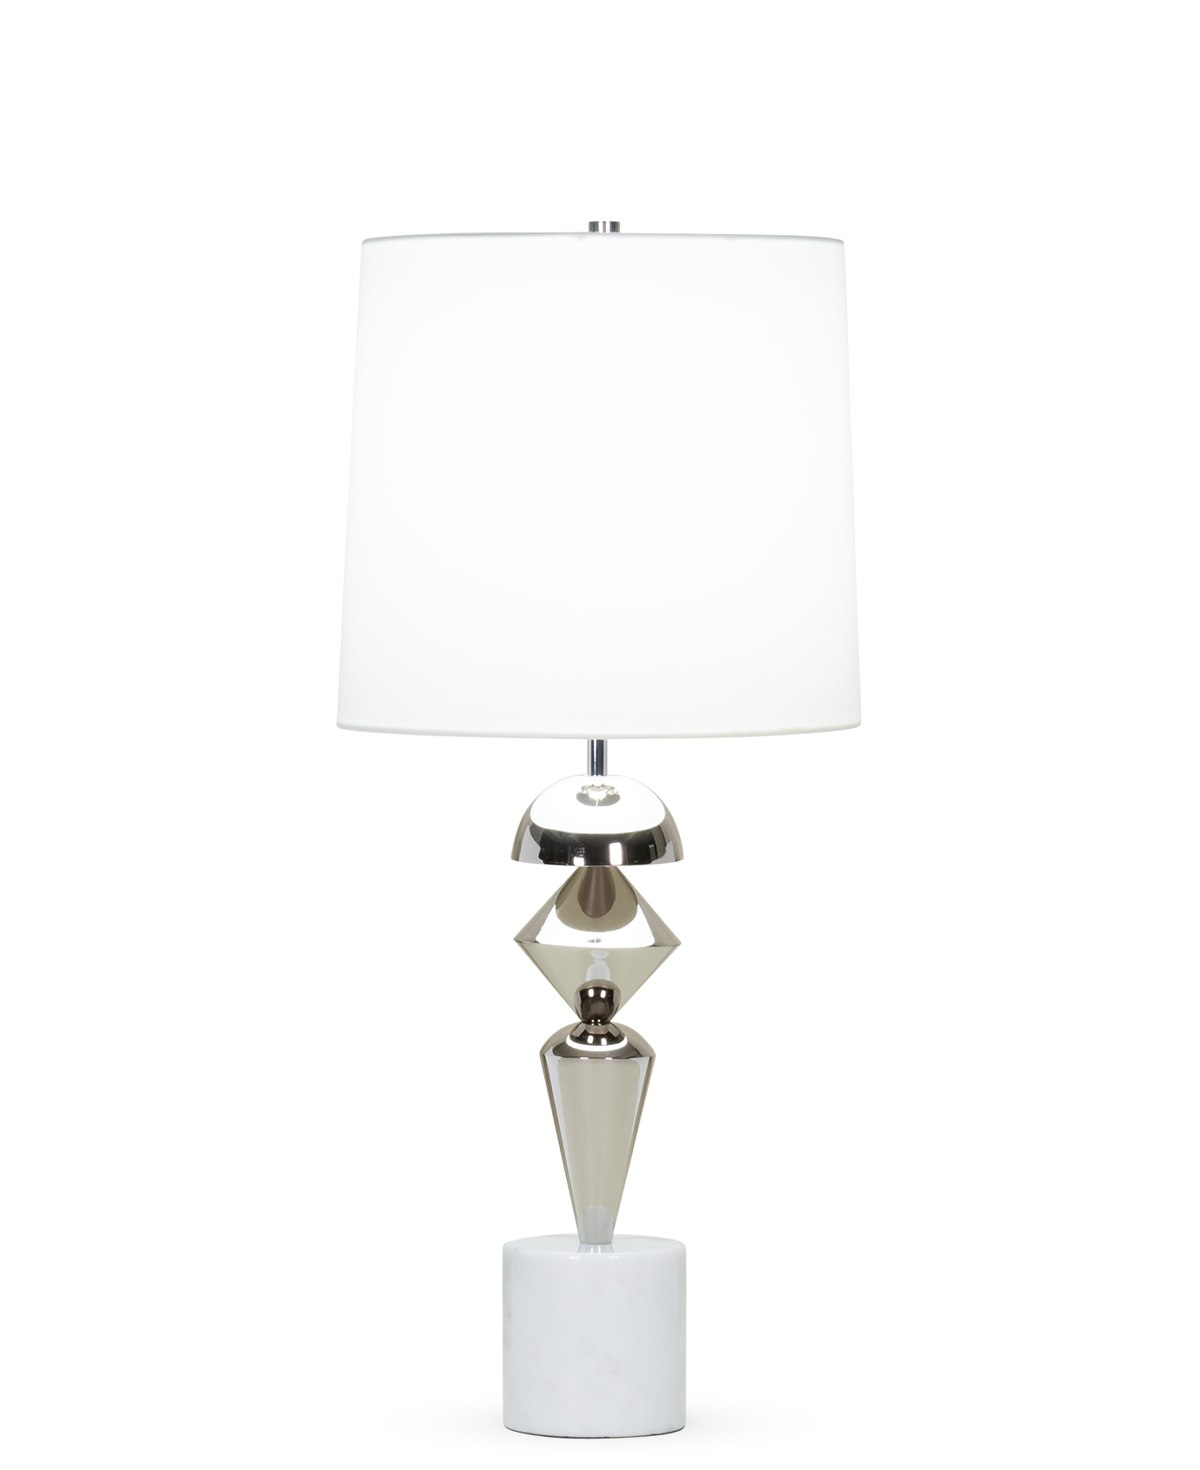 FlowDecor Fraser Table Lamp in white marble and metal with polished nickel finish and off-white cotton tapered drum shade (# 4406)